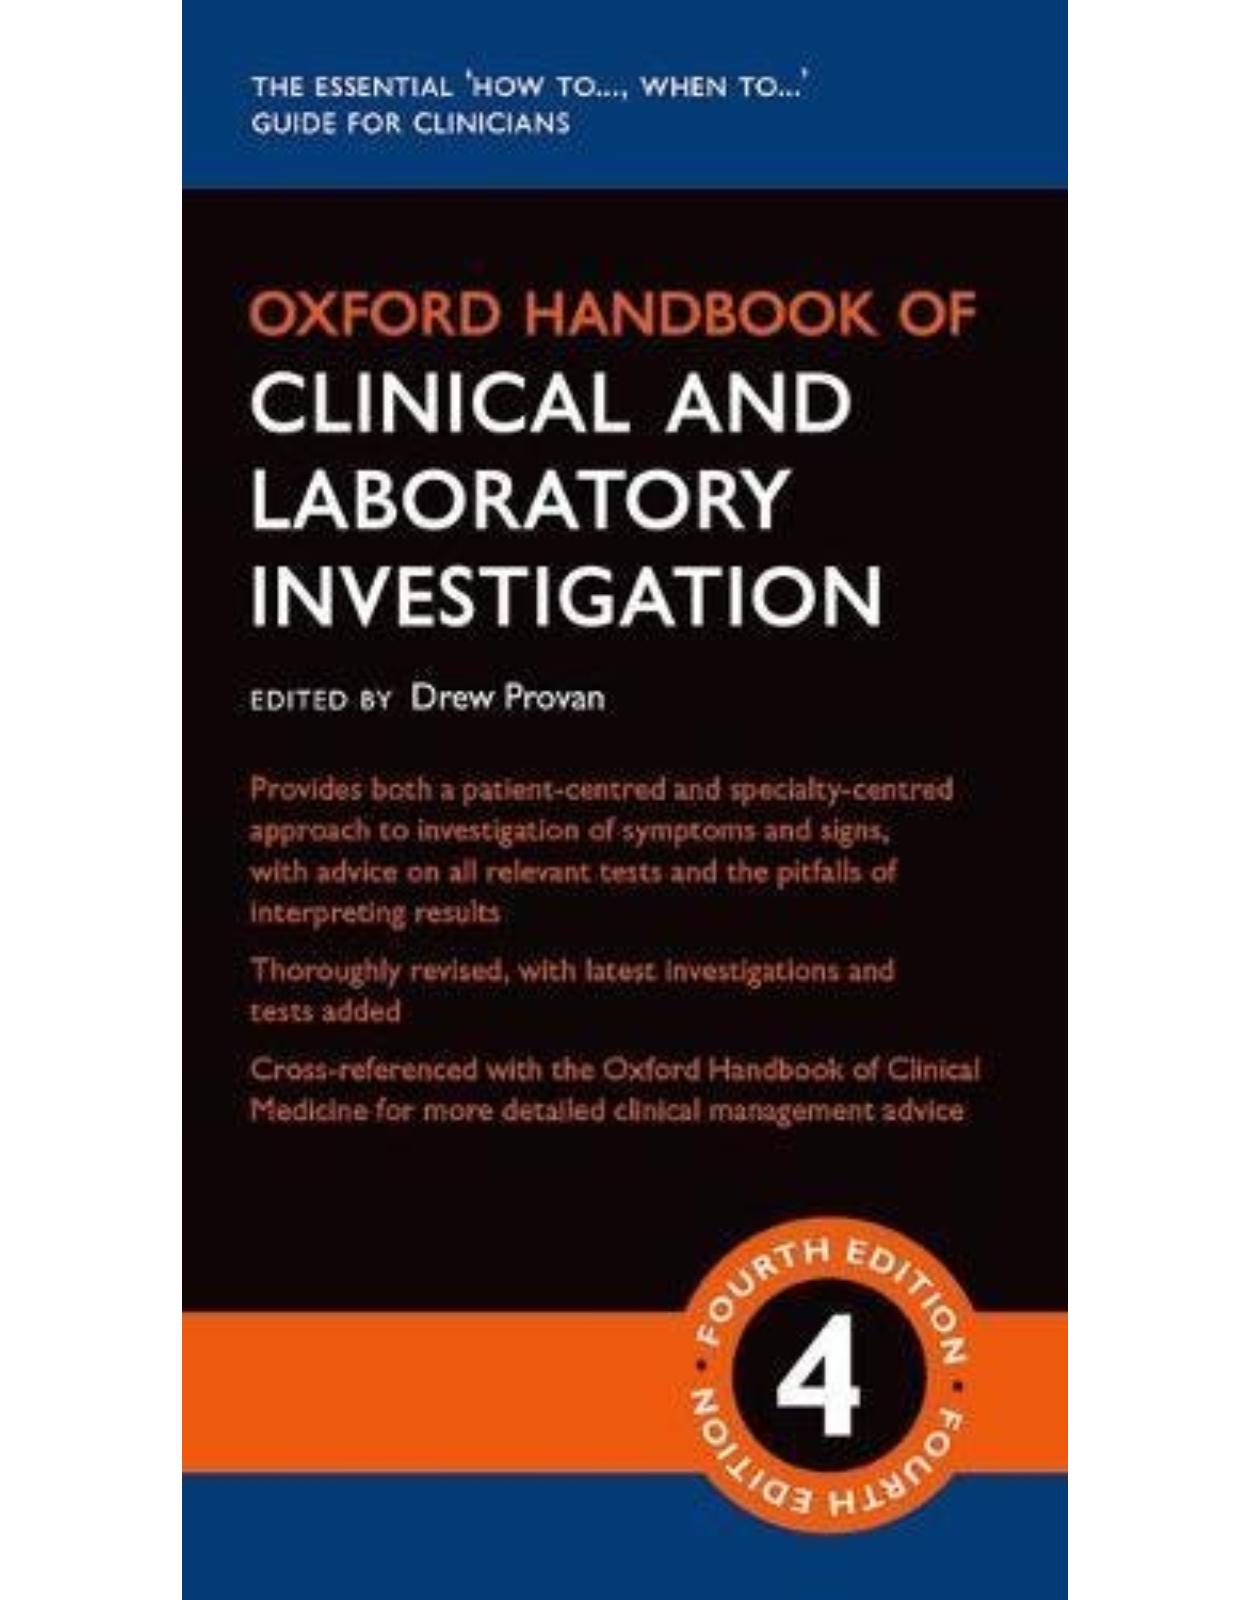 Oxford Handbook of Clinical and Laboratory Investigation 